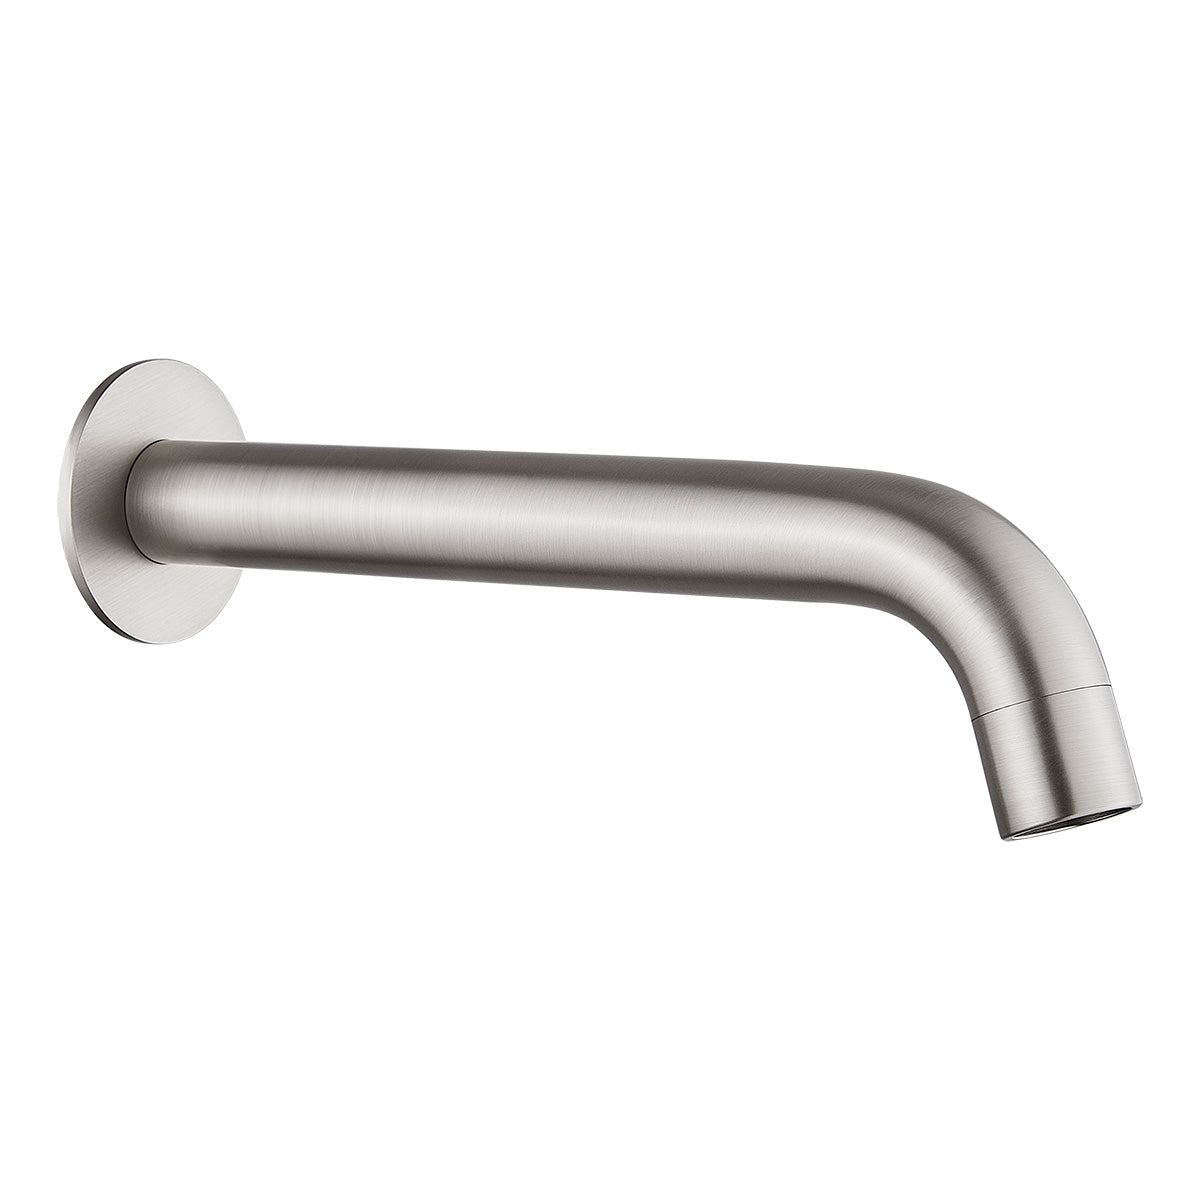 HELLYCAR IDEAL BATH OUTLET 210MM BRUSHED NICKEL